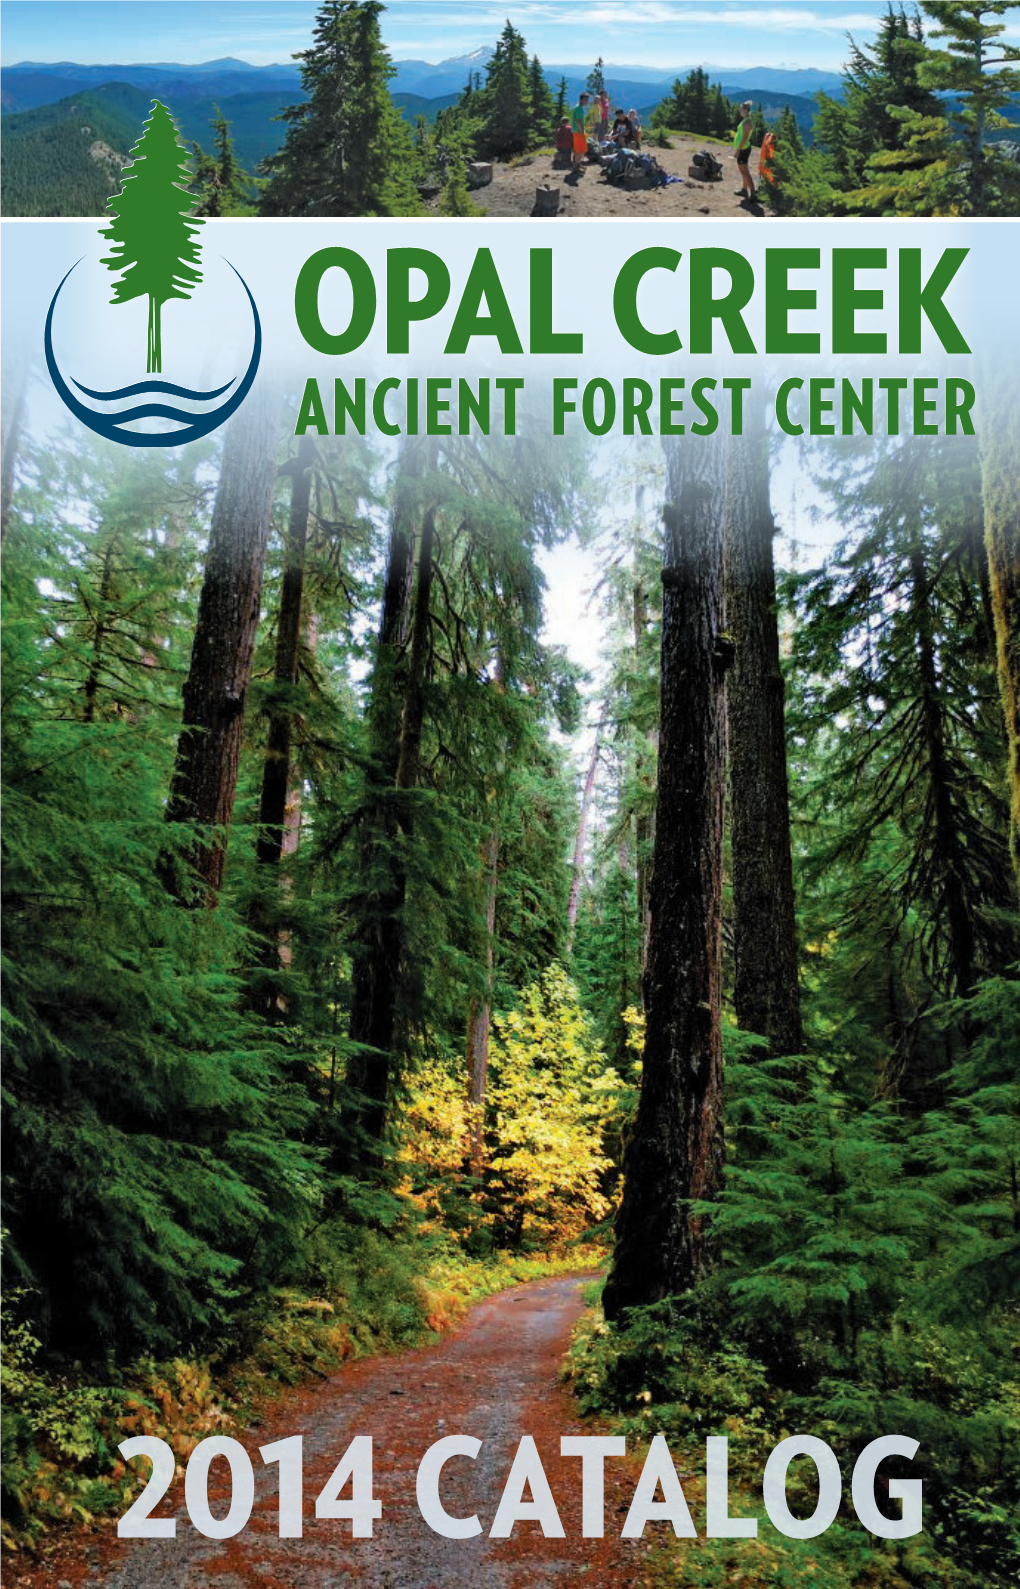 2014 Catalog 2 Welcome Opal Creek Ancient Forest Center 2014 Catalog Contents 3